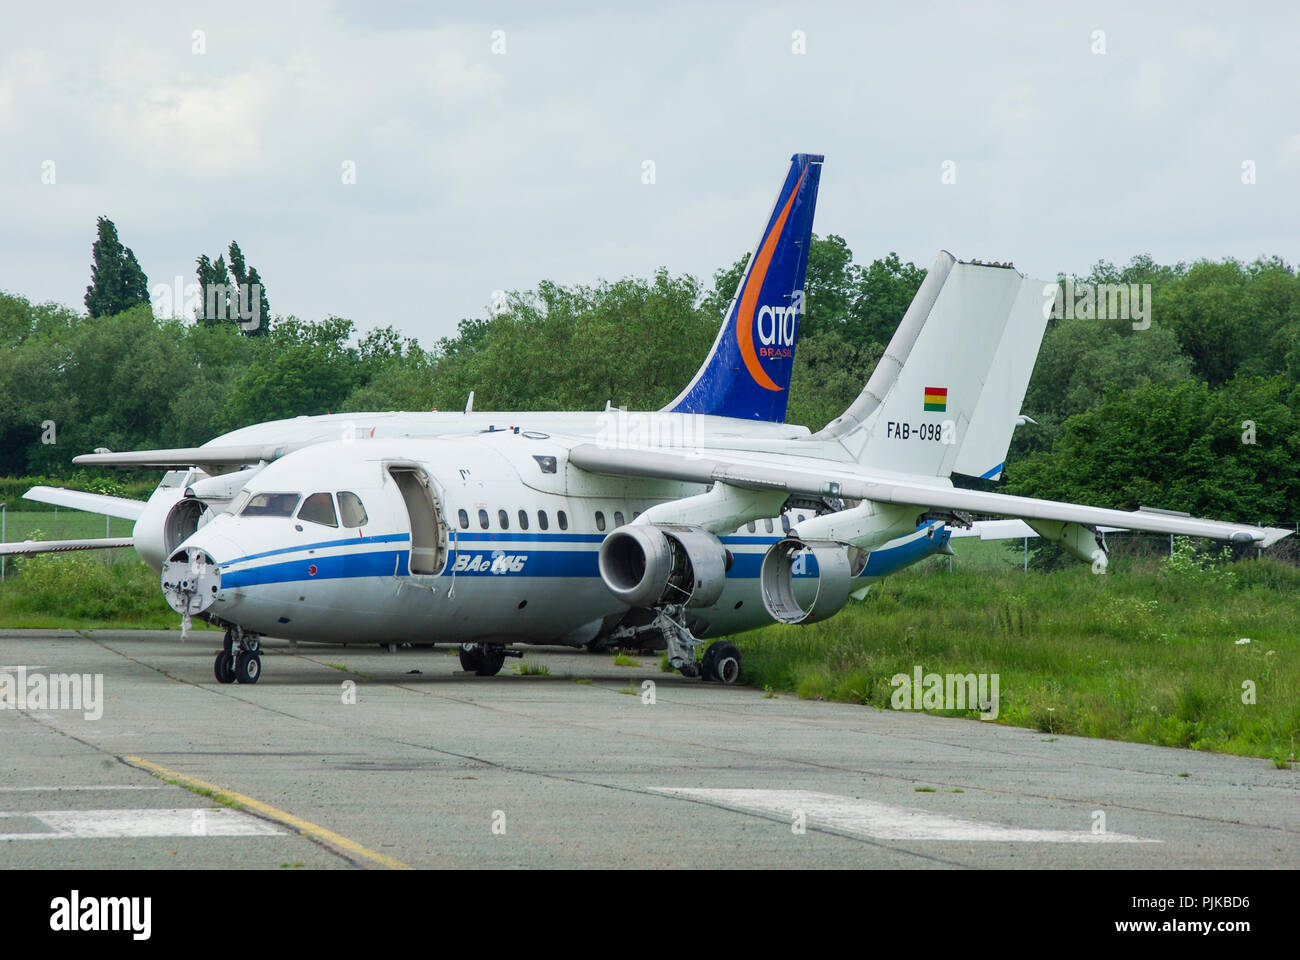 Fuerza Aérea Boliviana or FAB, Bolivian Air Force BAe 146 being stripped  for spare parts and scrapping Stock Photo - Alamy